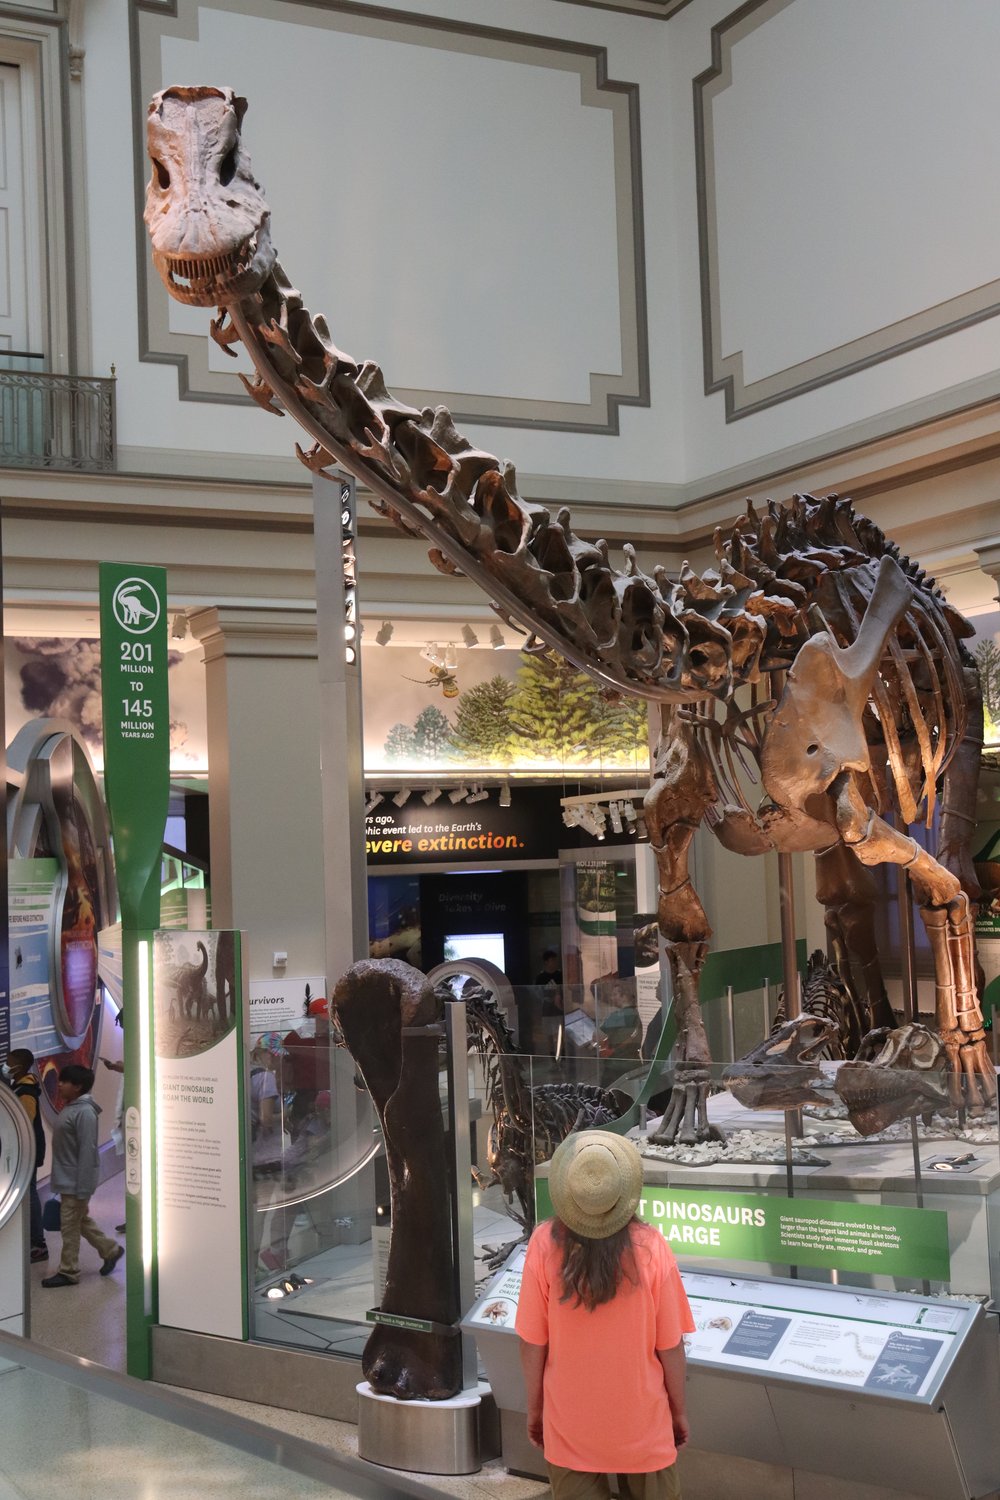 Lots of dinosaur bones. Turns out Tom Holland and Dominic Sandbrook were in DC for a show this week (from the podcast, "The Rest is History"). I wonder if Tom checked out the dinosaurs.